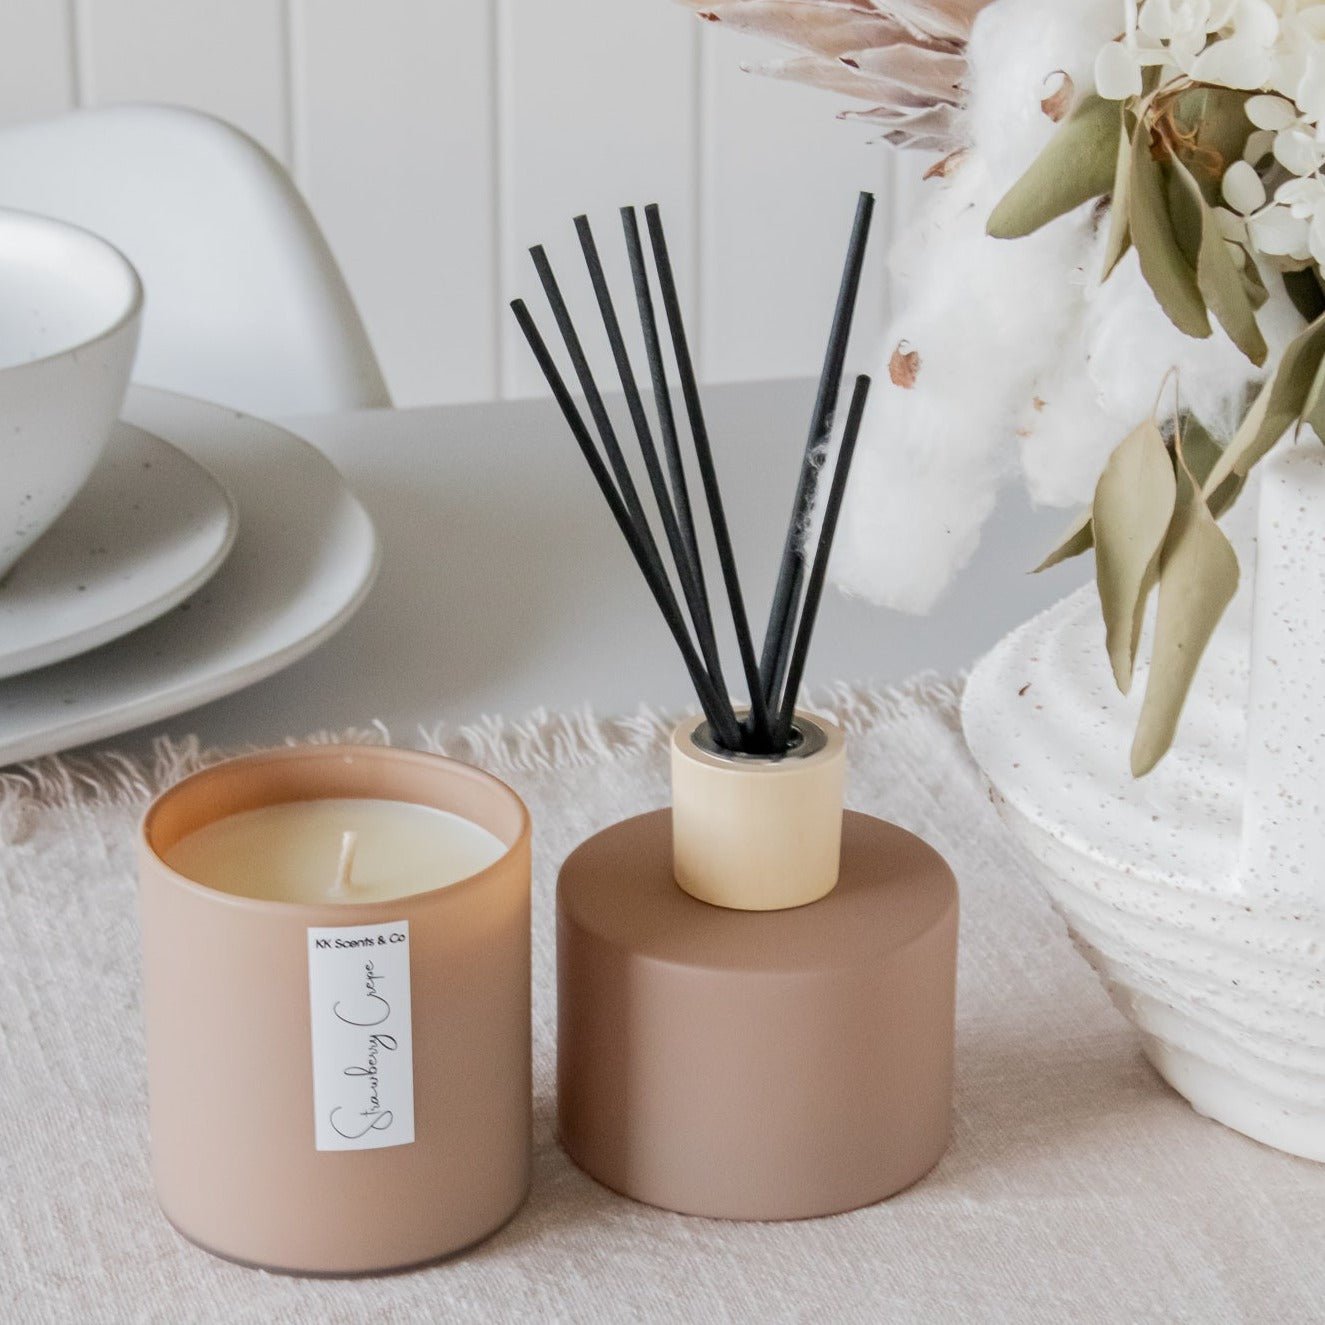 Brown Candle & Diffuser Duo Set - KK Scents & Co.